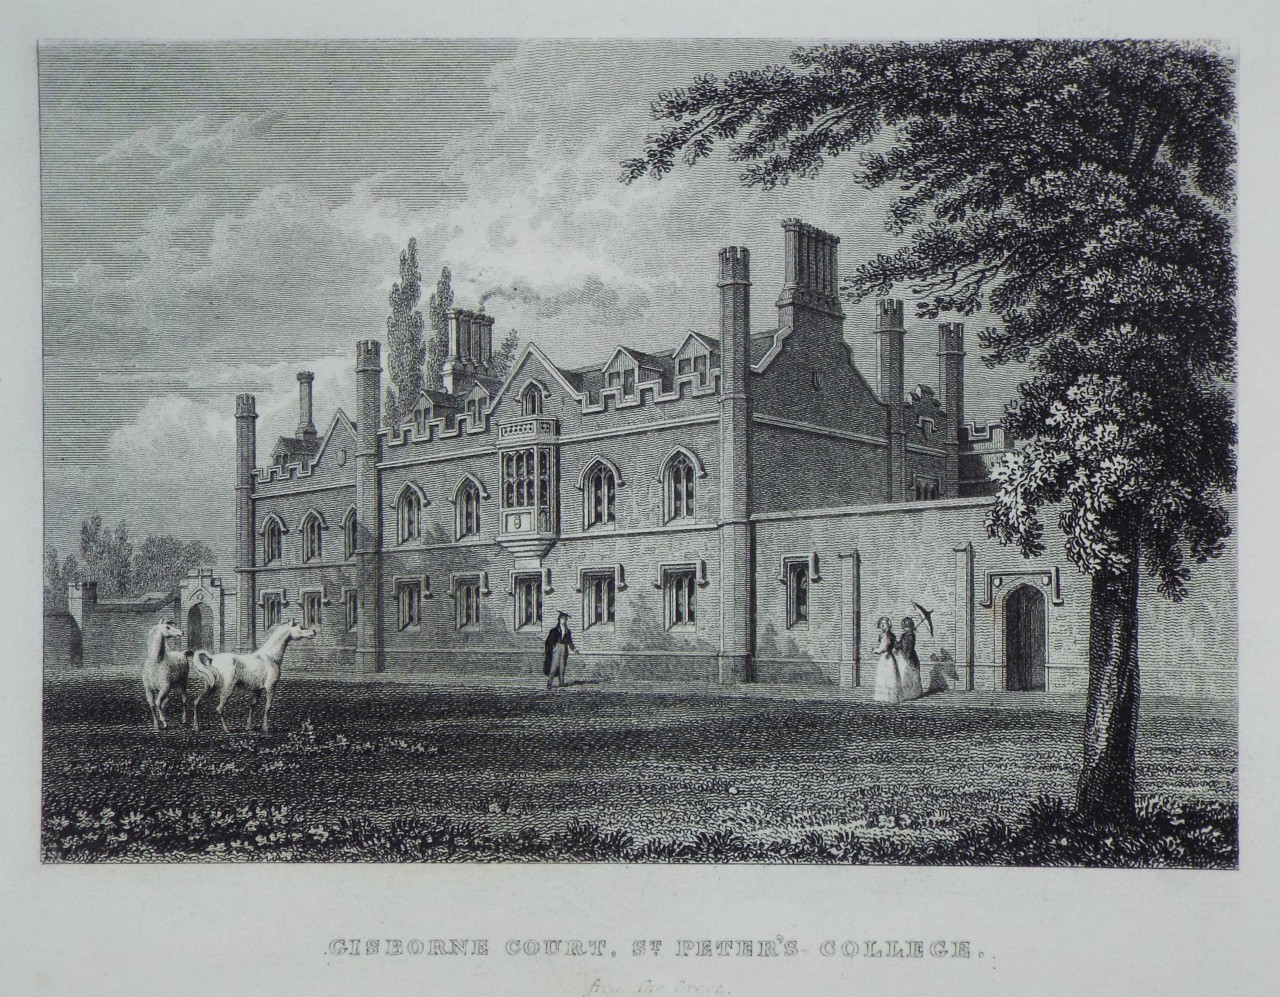 Print - Gisborne Court, St. Peter's Pollege. from the Grove.